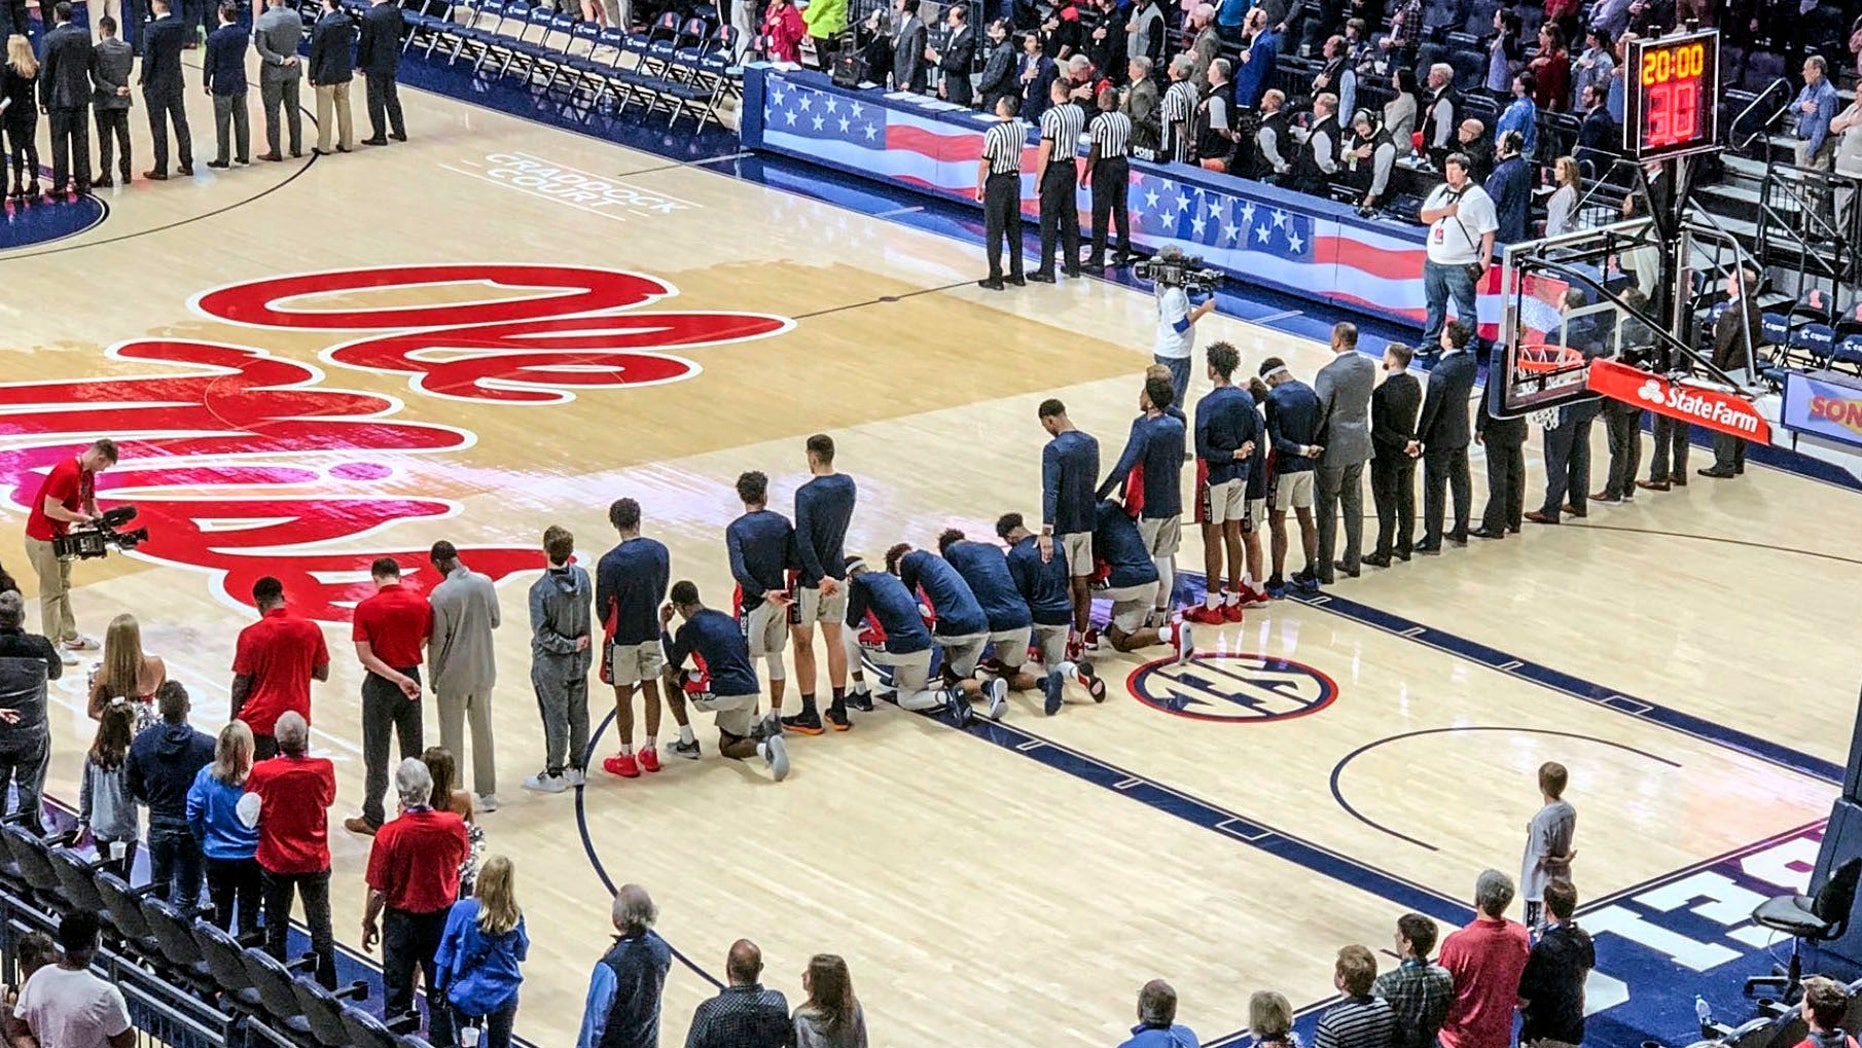 Six Mississippi basketball players kneel at the national anthem before a university basketball match against Georgia in Oxford on Saturday.